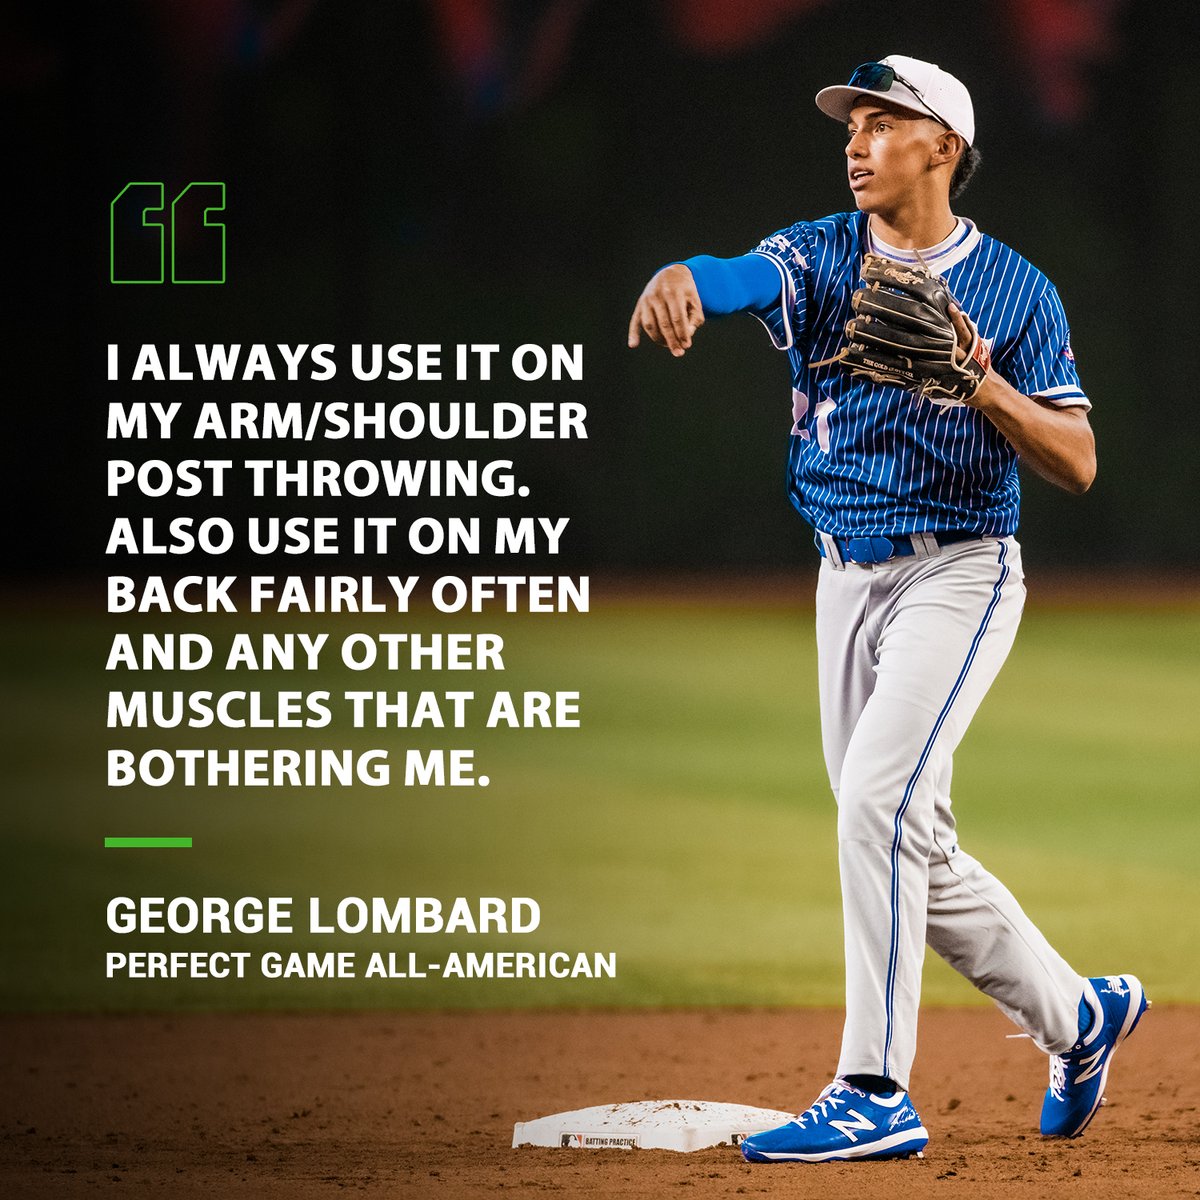 Shoulder, back, legs...any muscle that's bothering you, we've got you covered @georgelombardjr 

#armcare #recovery #PGAAC #baseball